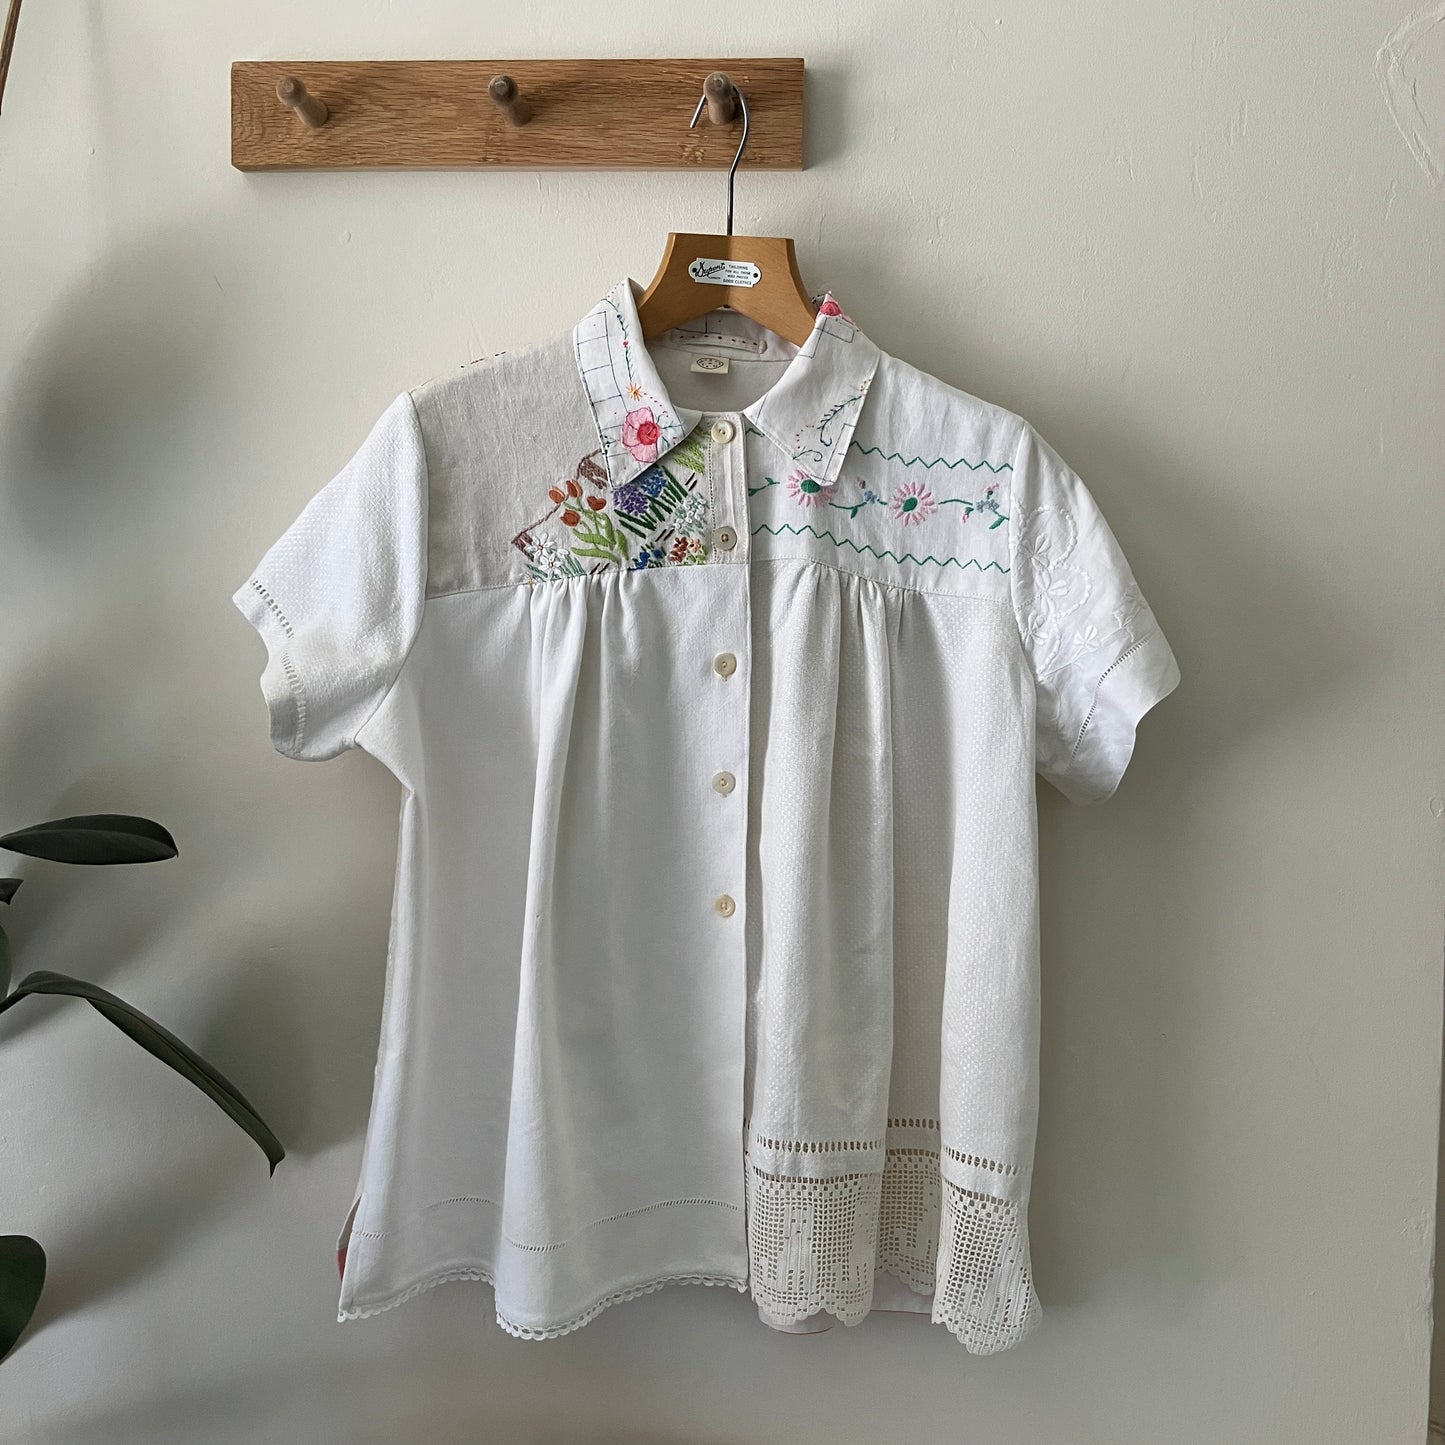 One-of-a-kind linen and cotton shirt made from reclaimed tablecloths and a special filet crochet CATS vintage panel